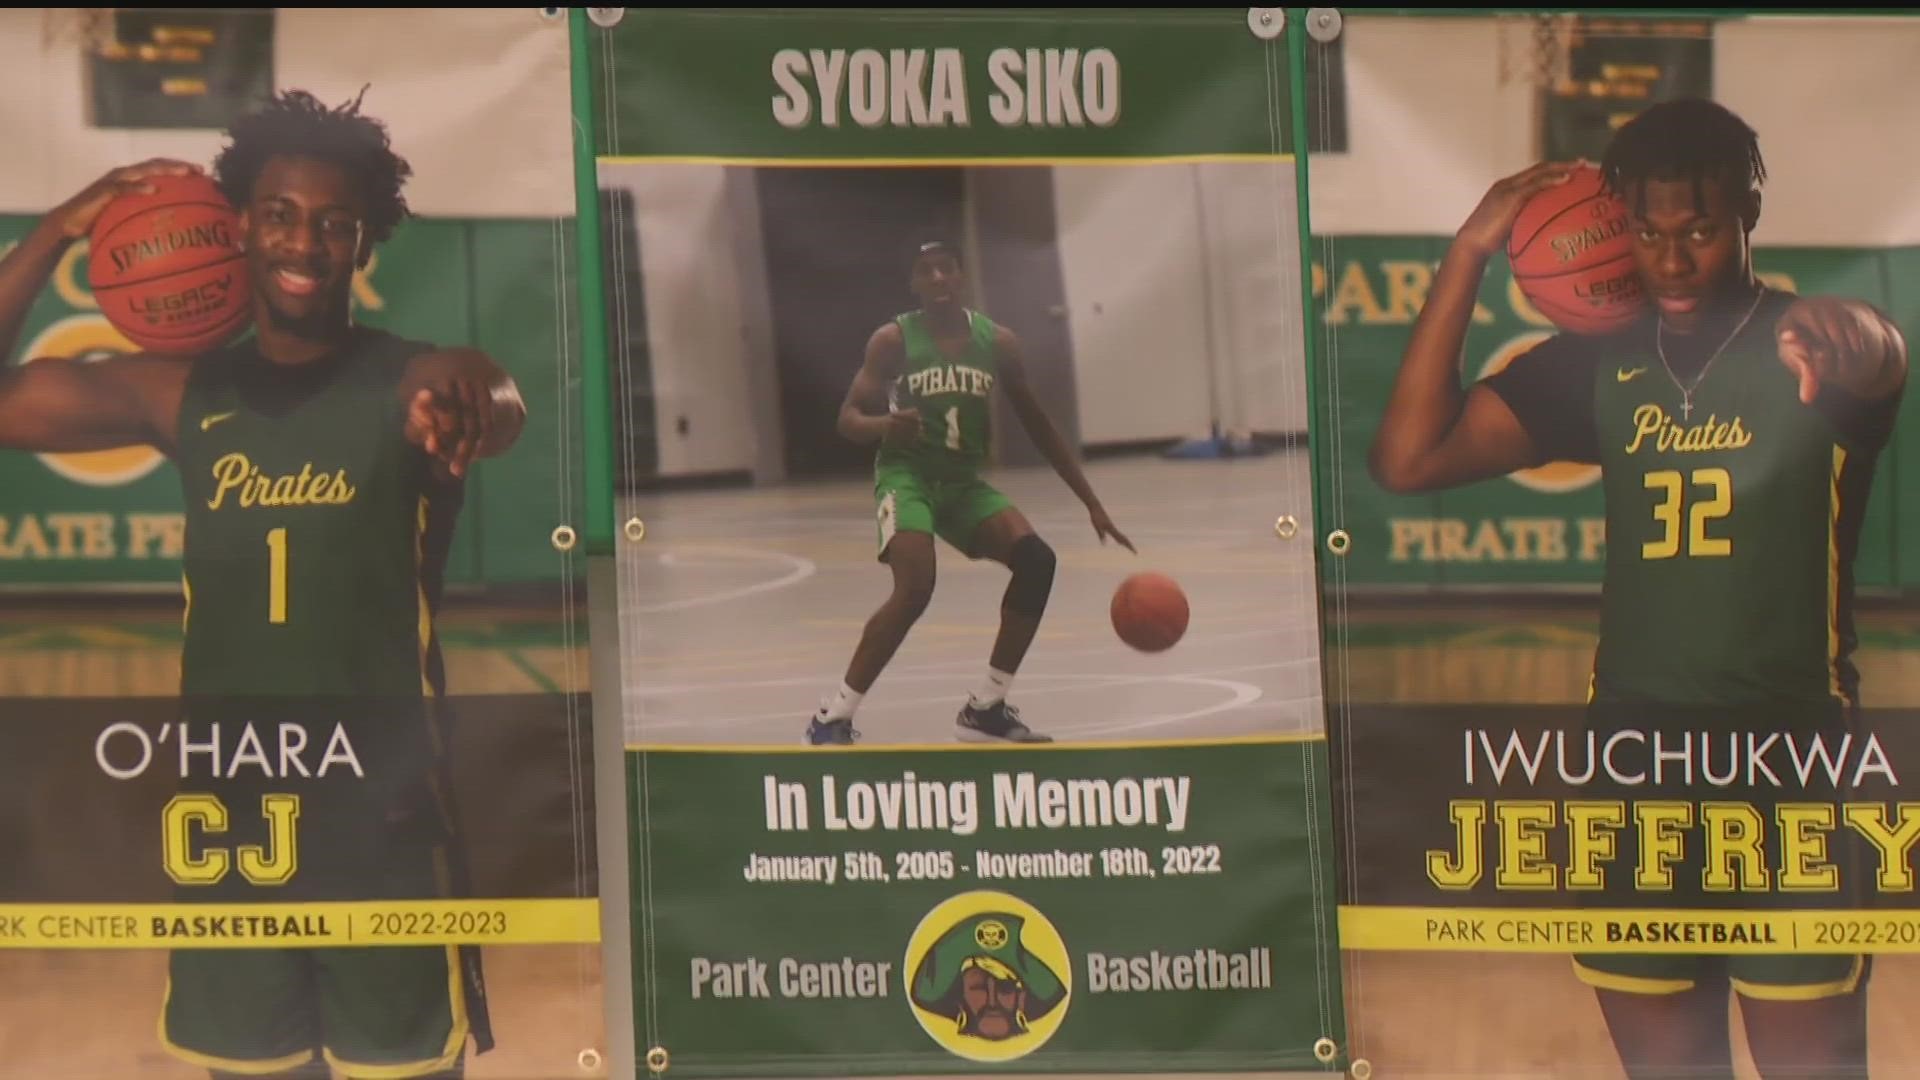 In November, the Pirates lost one of their own, Syoka Siko.